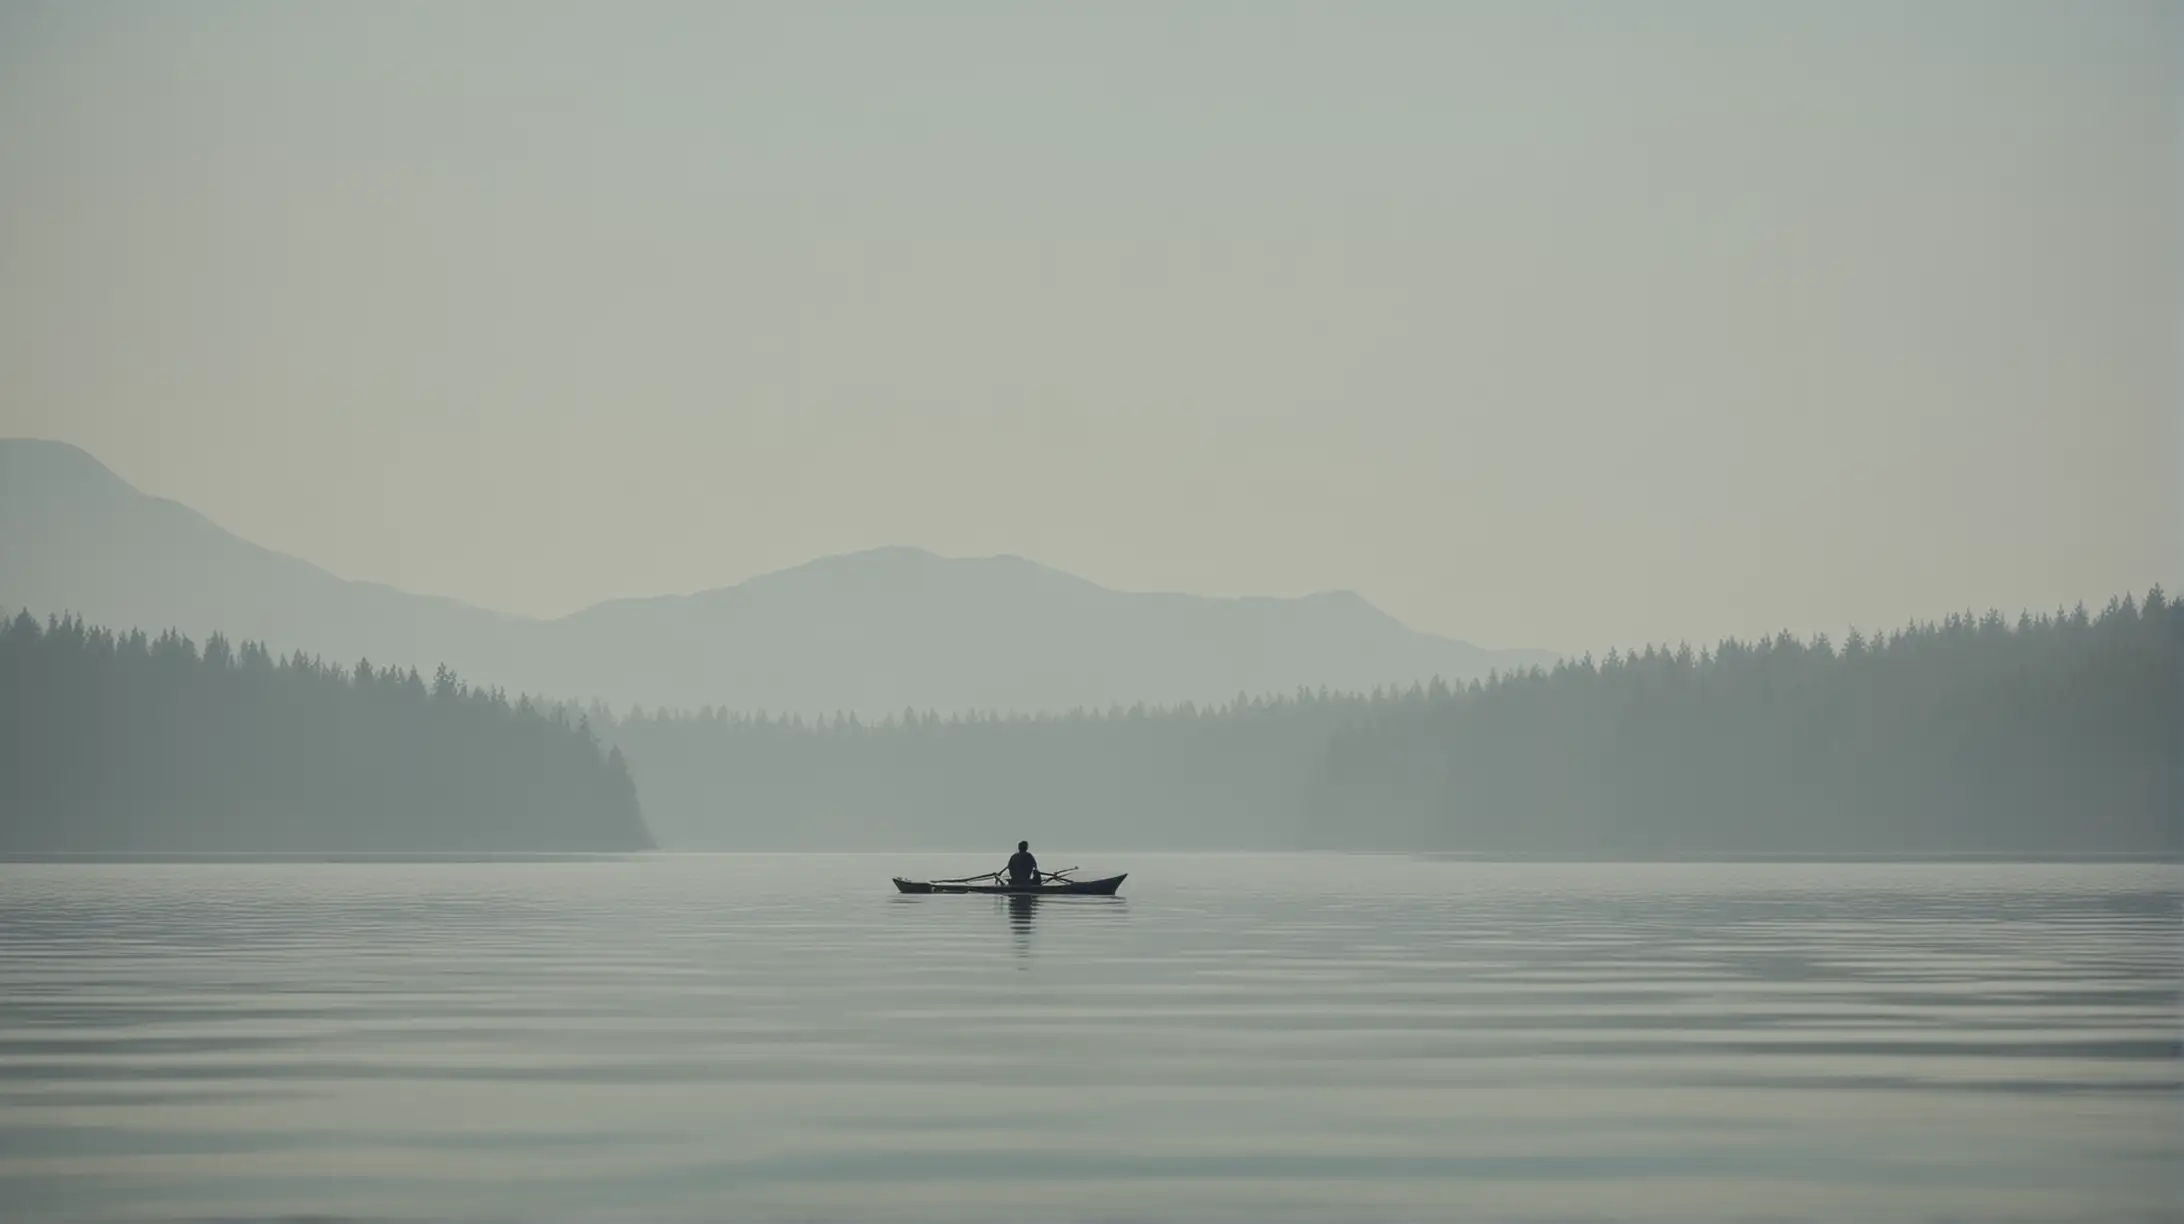 A lone man in a one boat sailing on an empty calm lake